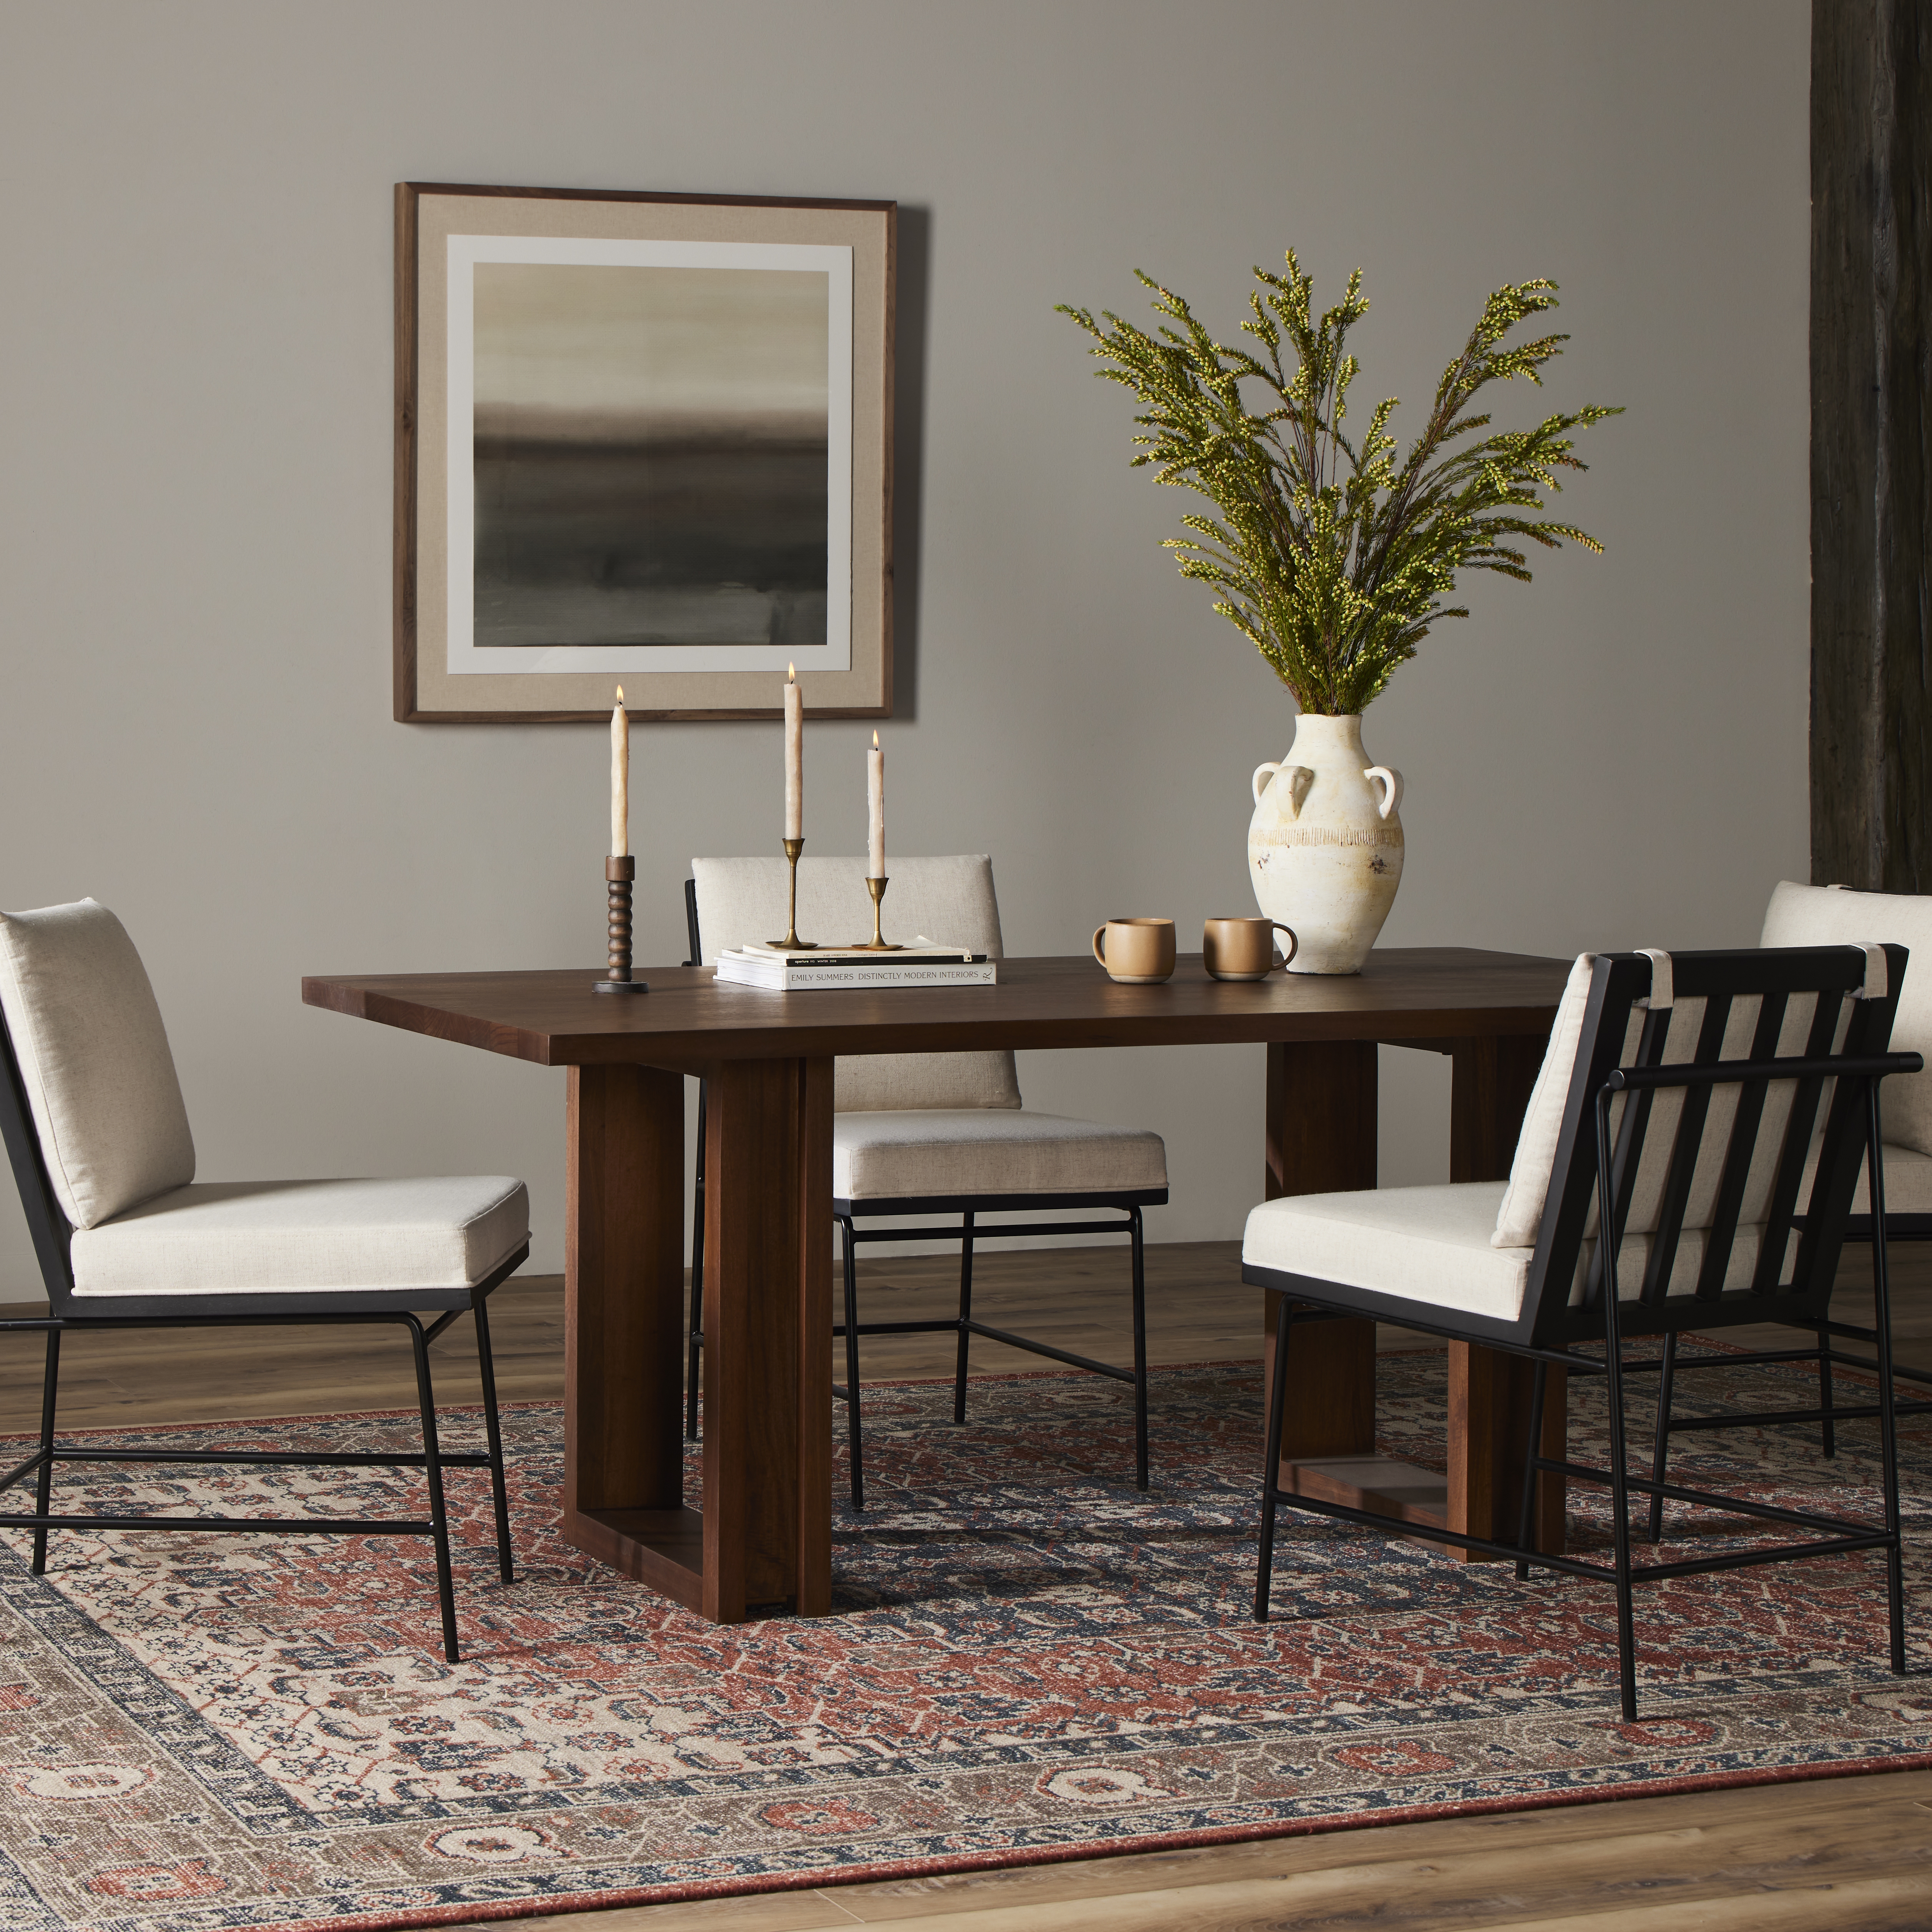 Carmel Dining Table-Brown Wash - Image 12